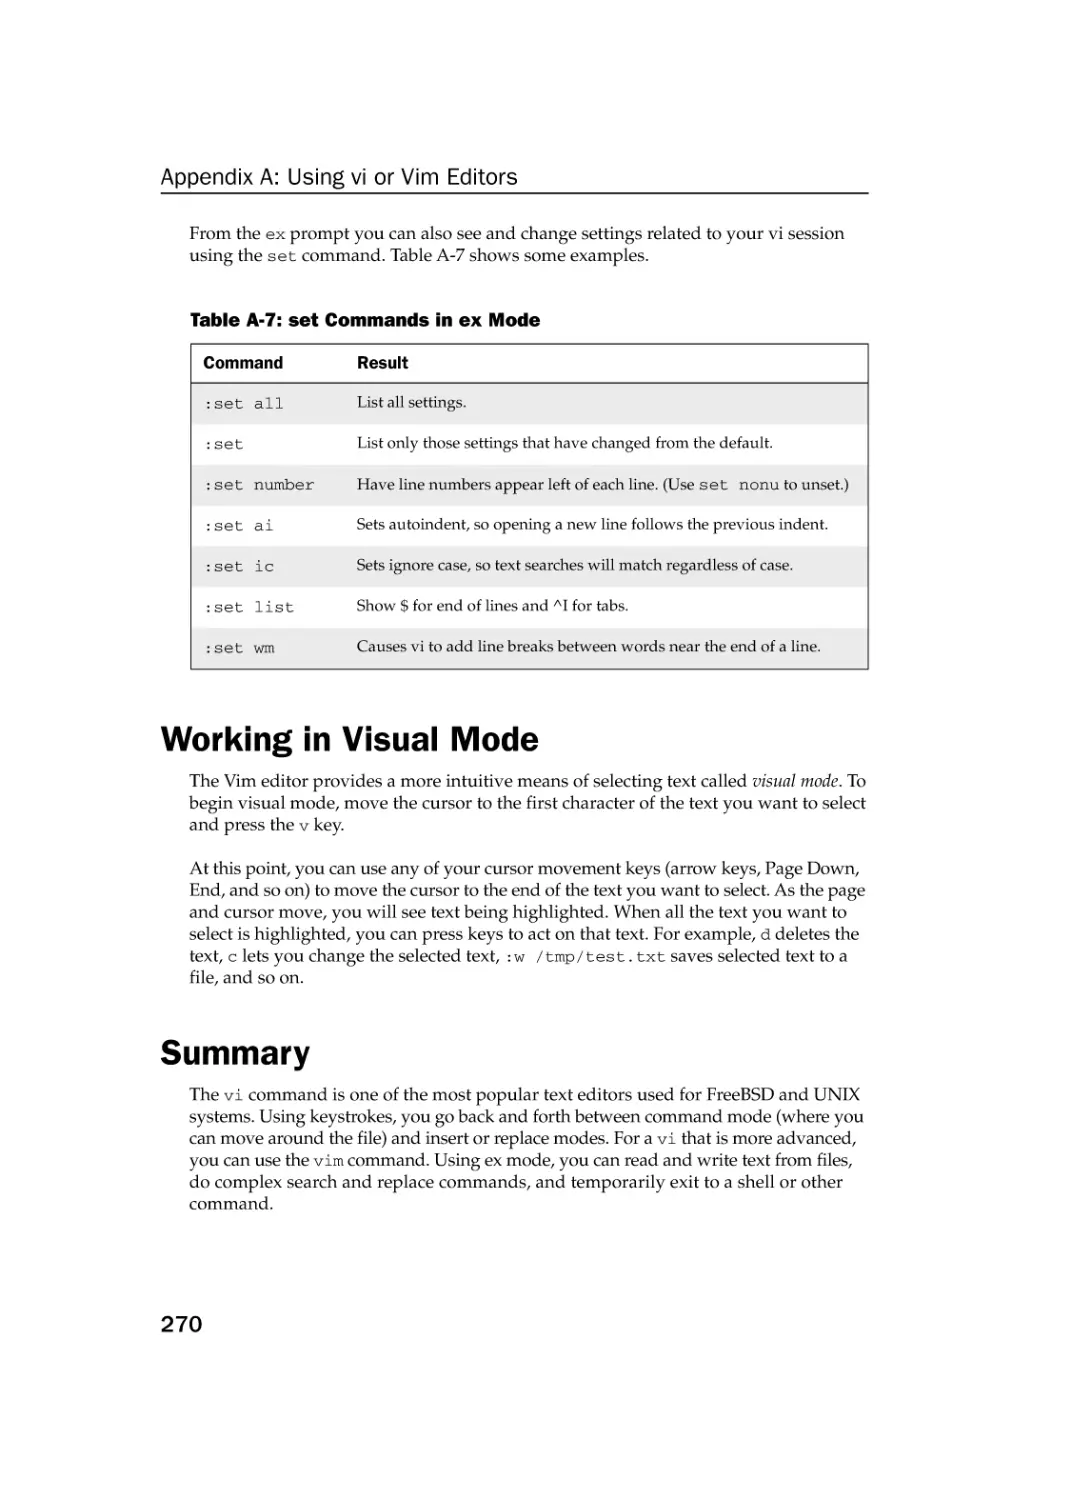 Working in Visual Mode
Summary